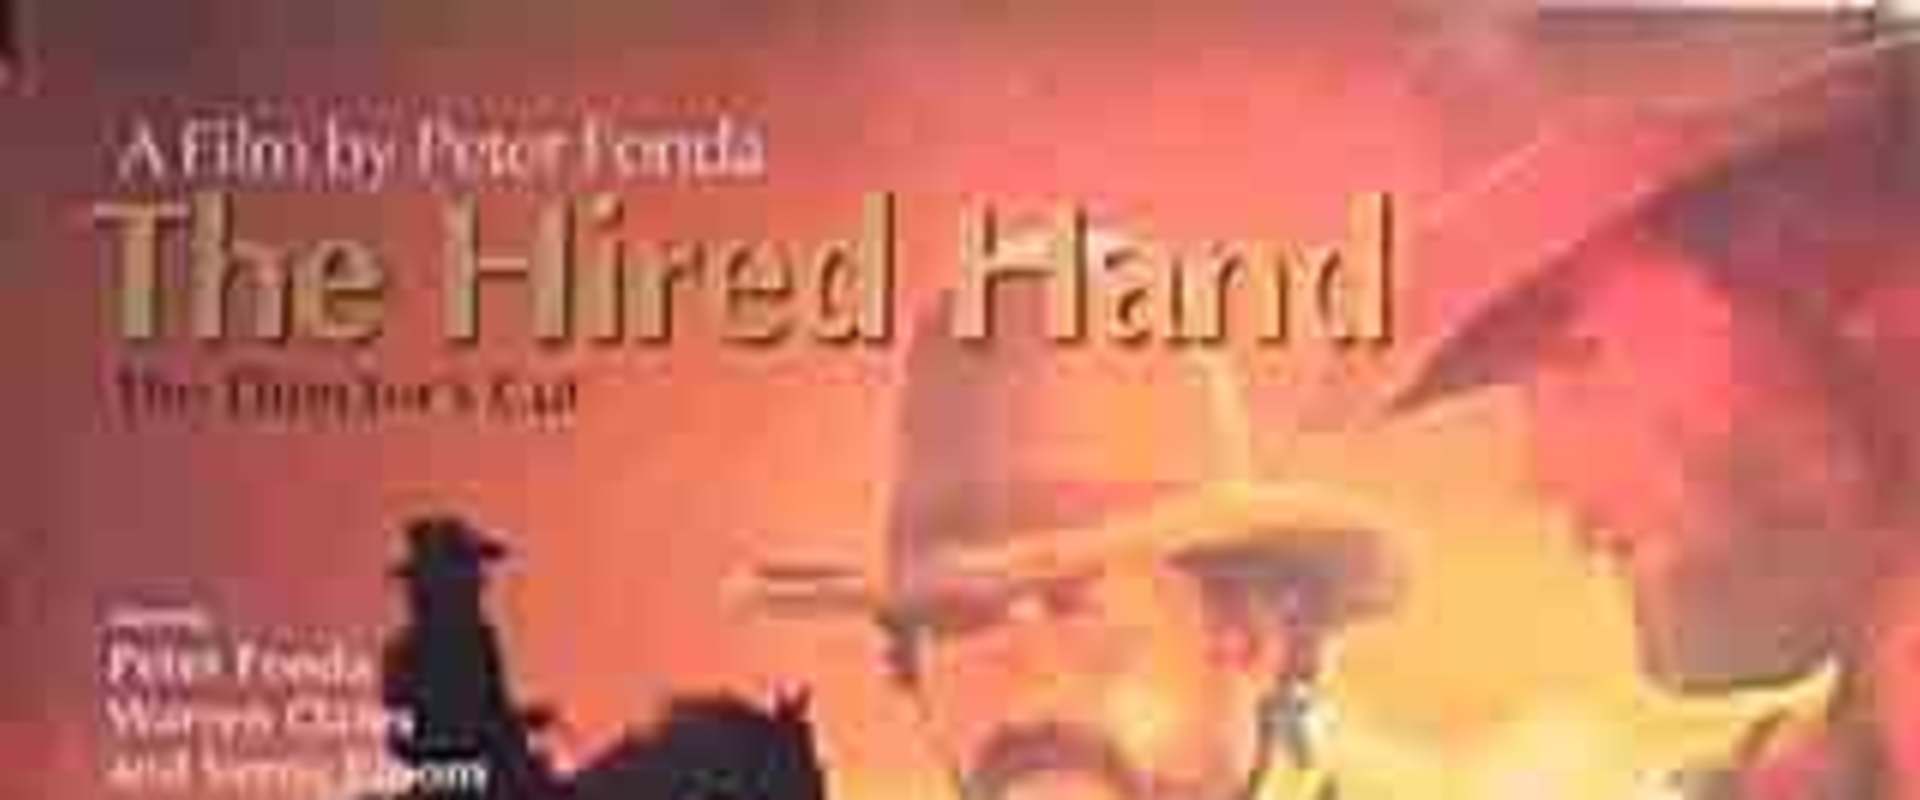 The Hired Hand background 1